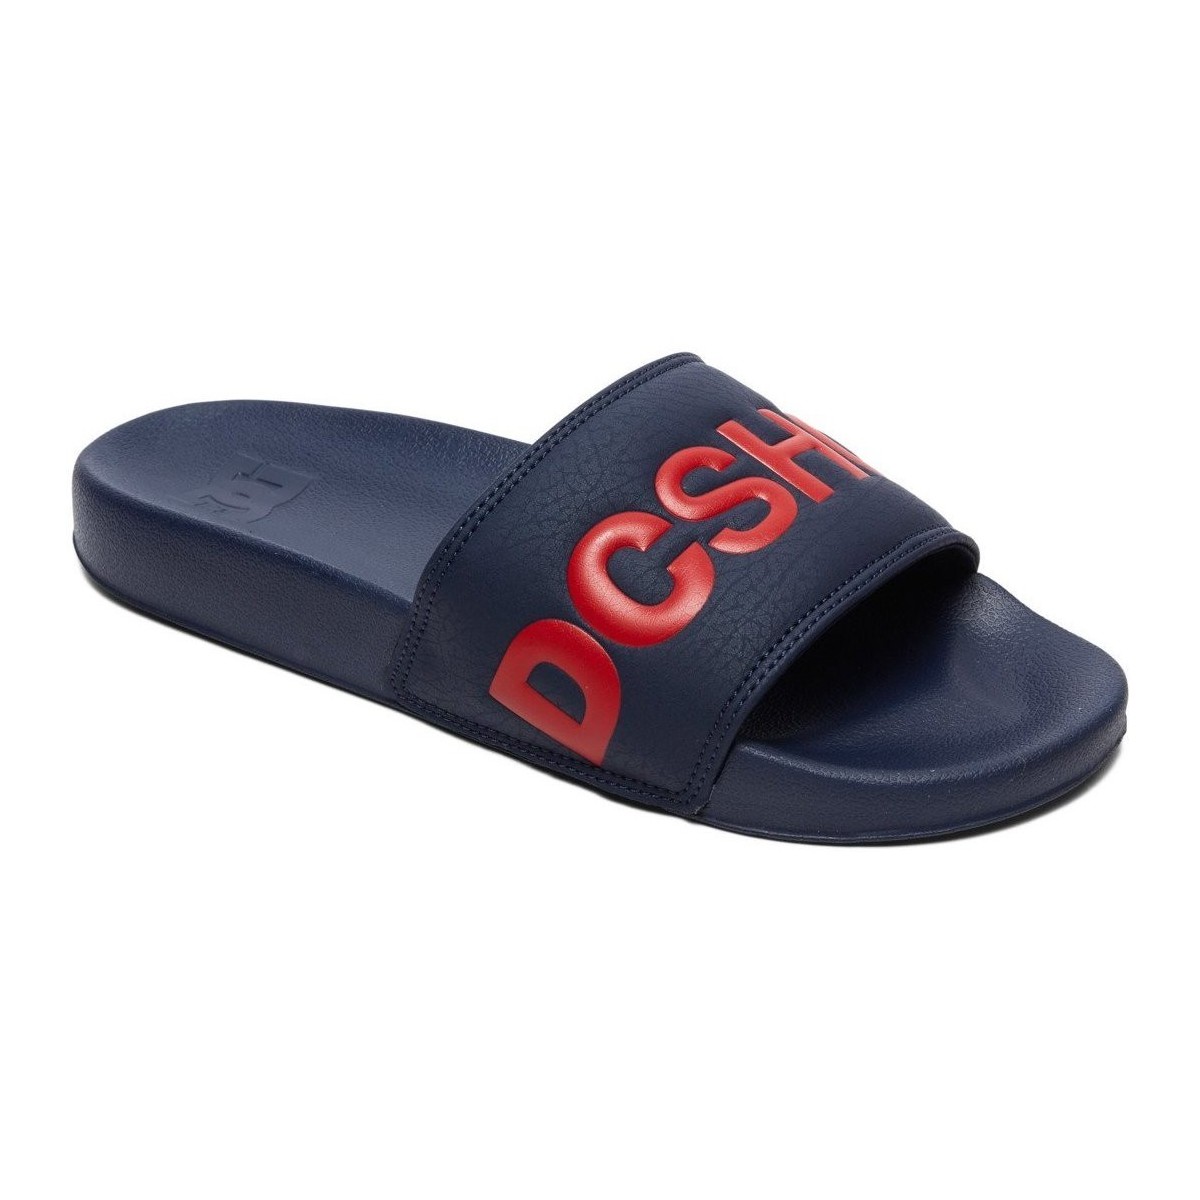 Chaussures Homme sneakers azules talla 47.5 DC Shoes DC Slide Bleu